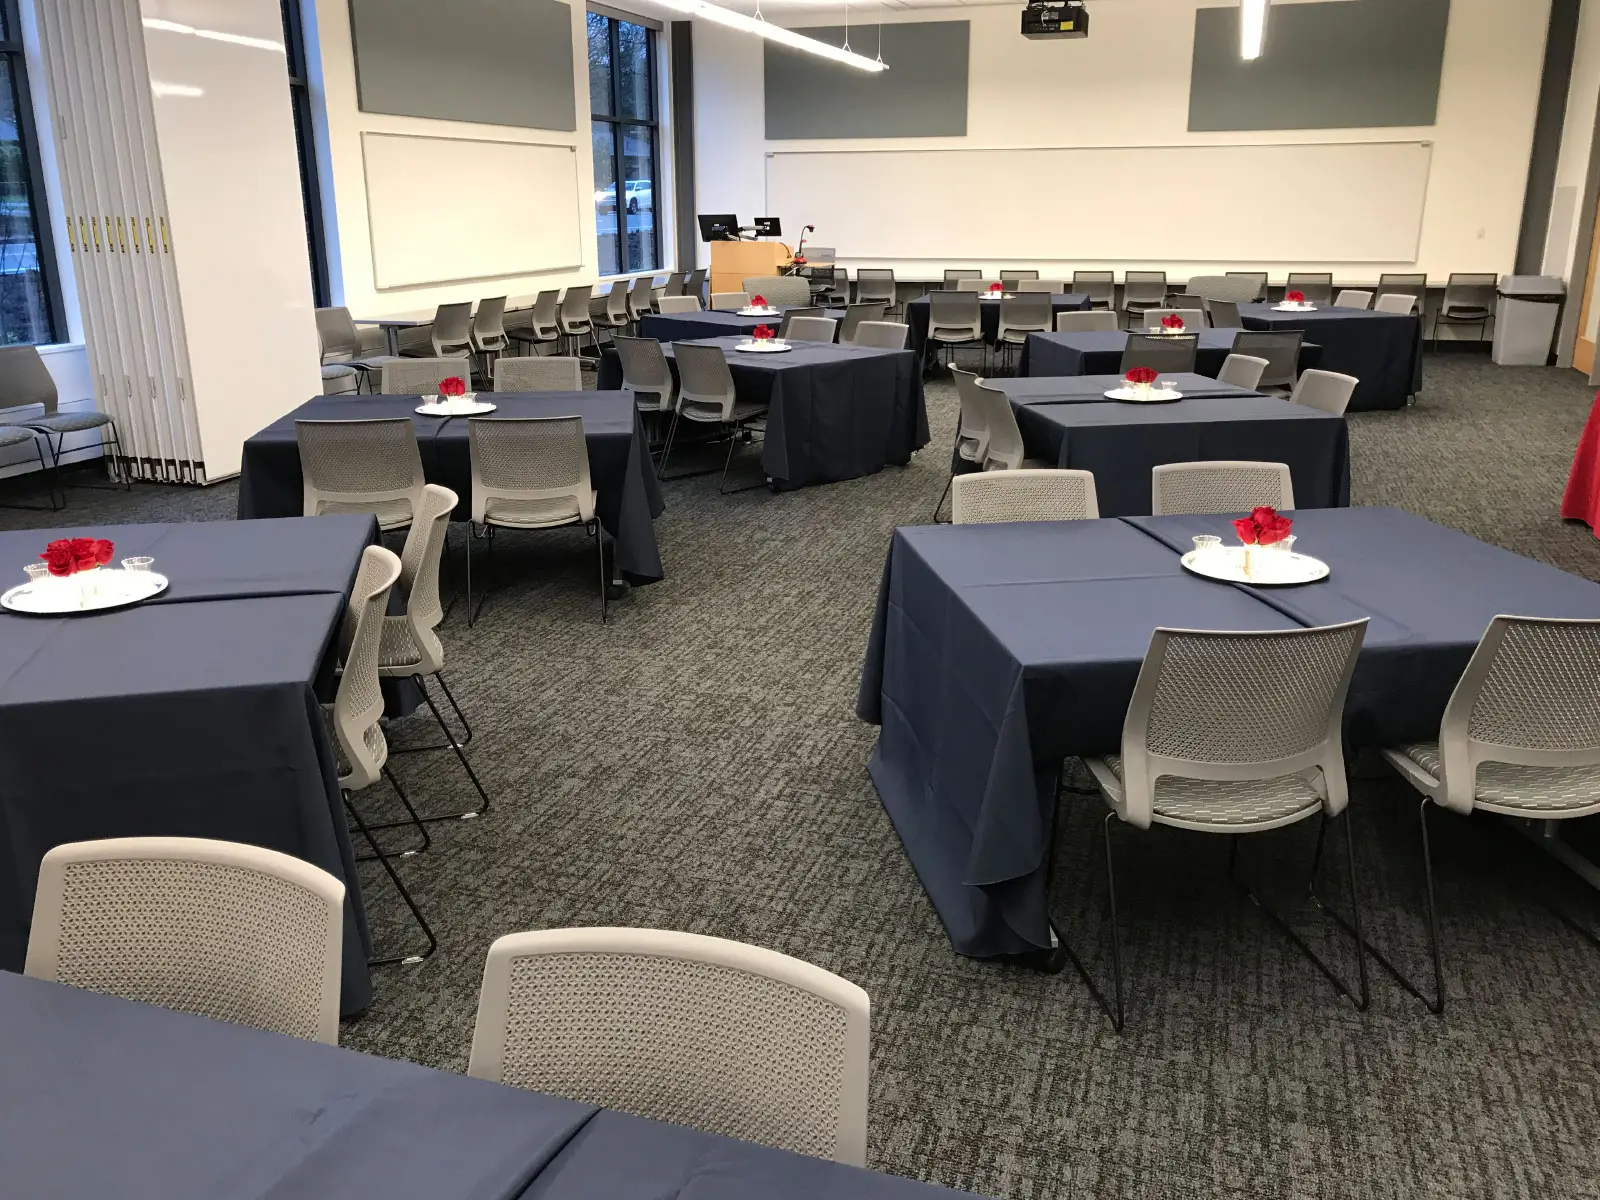 Decorated tables and centerpieces in Harmony Campus community room